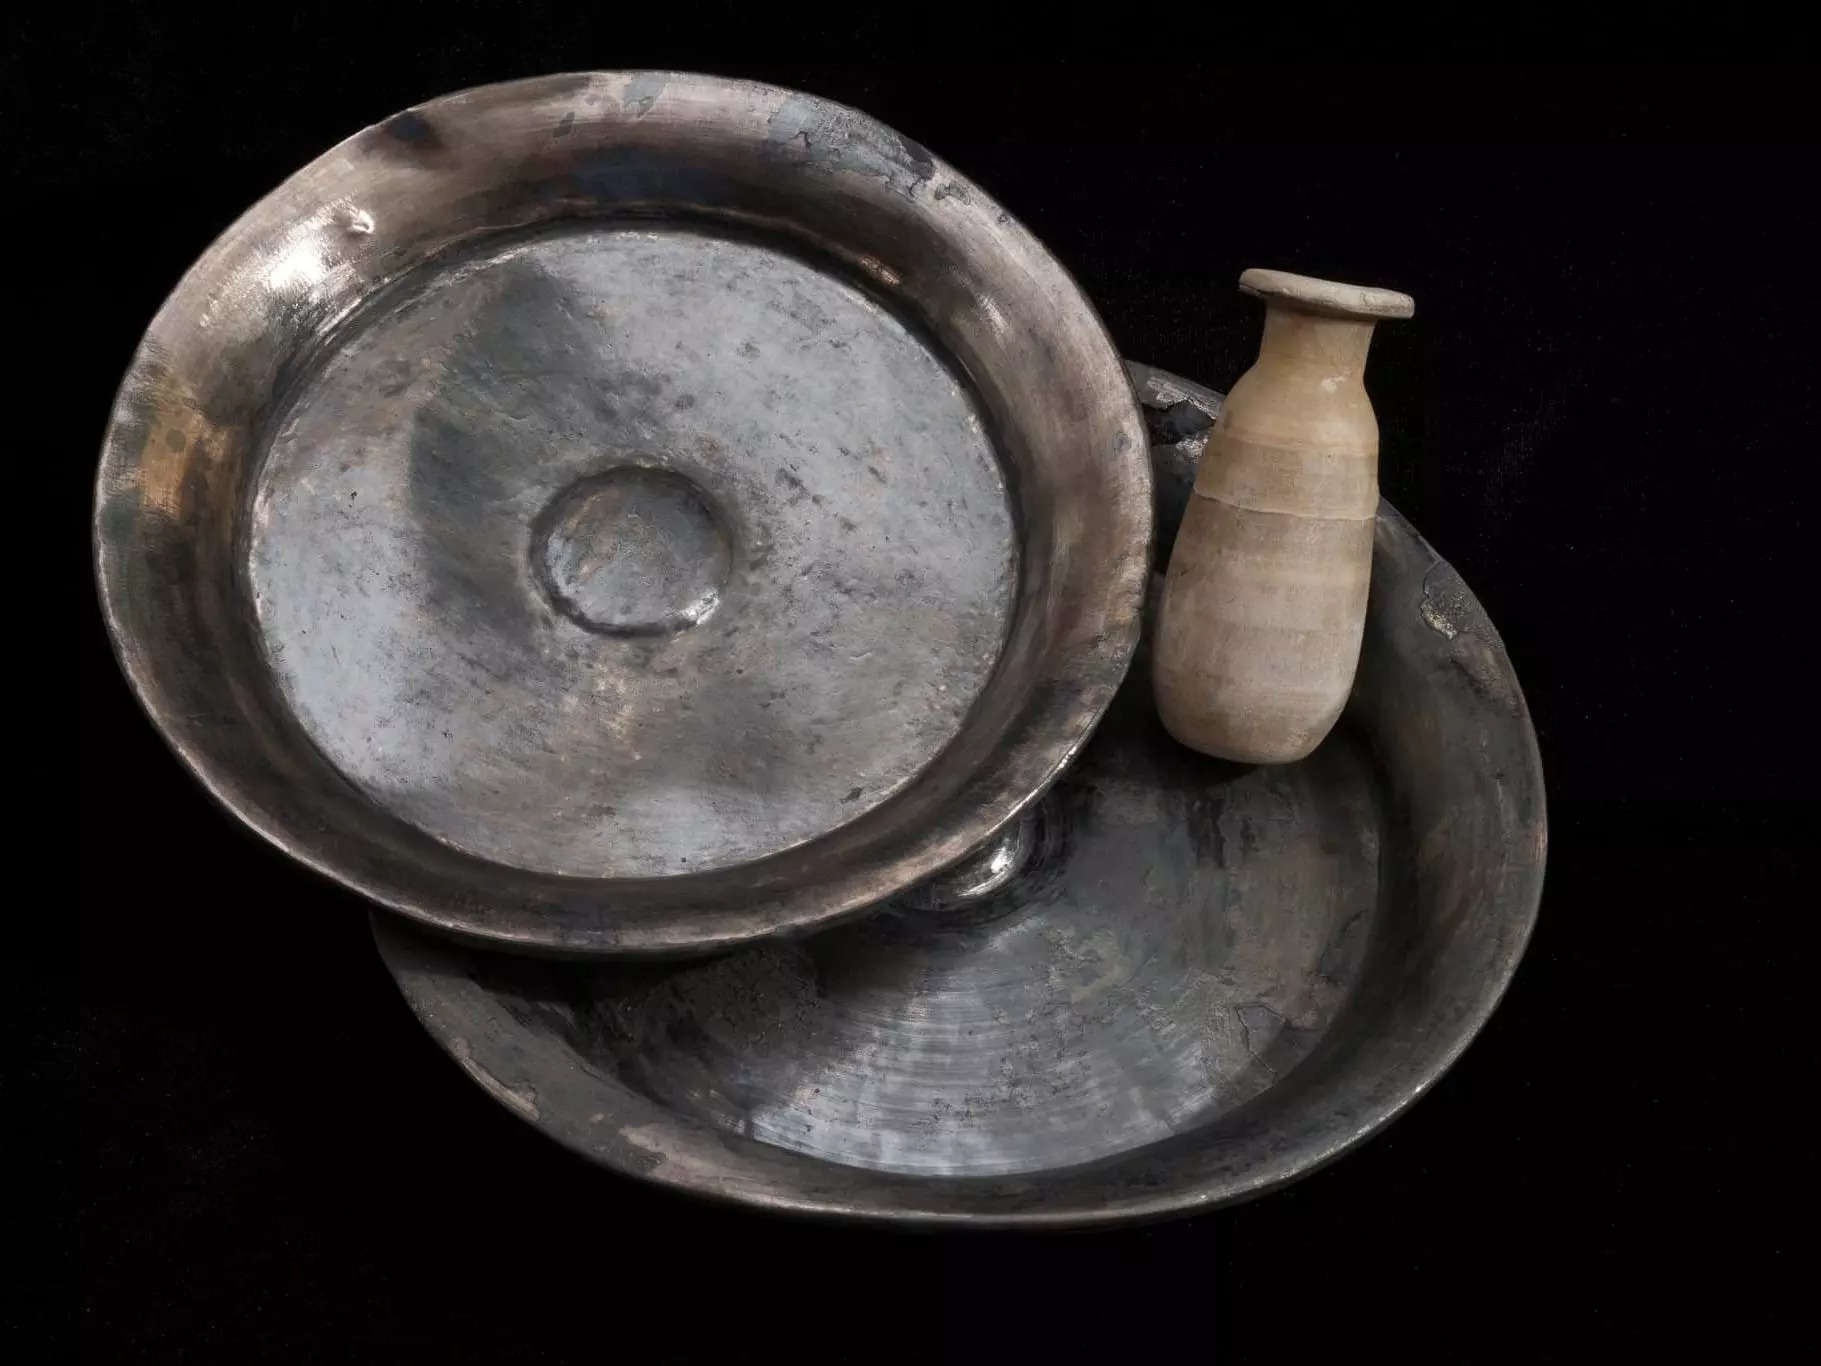 A picture shows two silver plates and a small alabaster container placed on a black background for display.